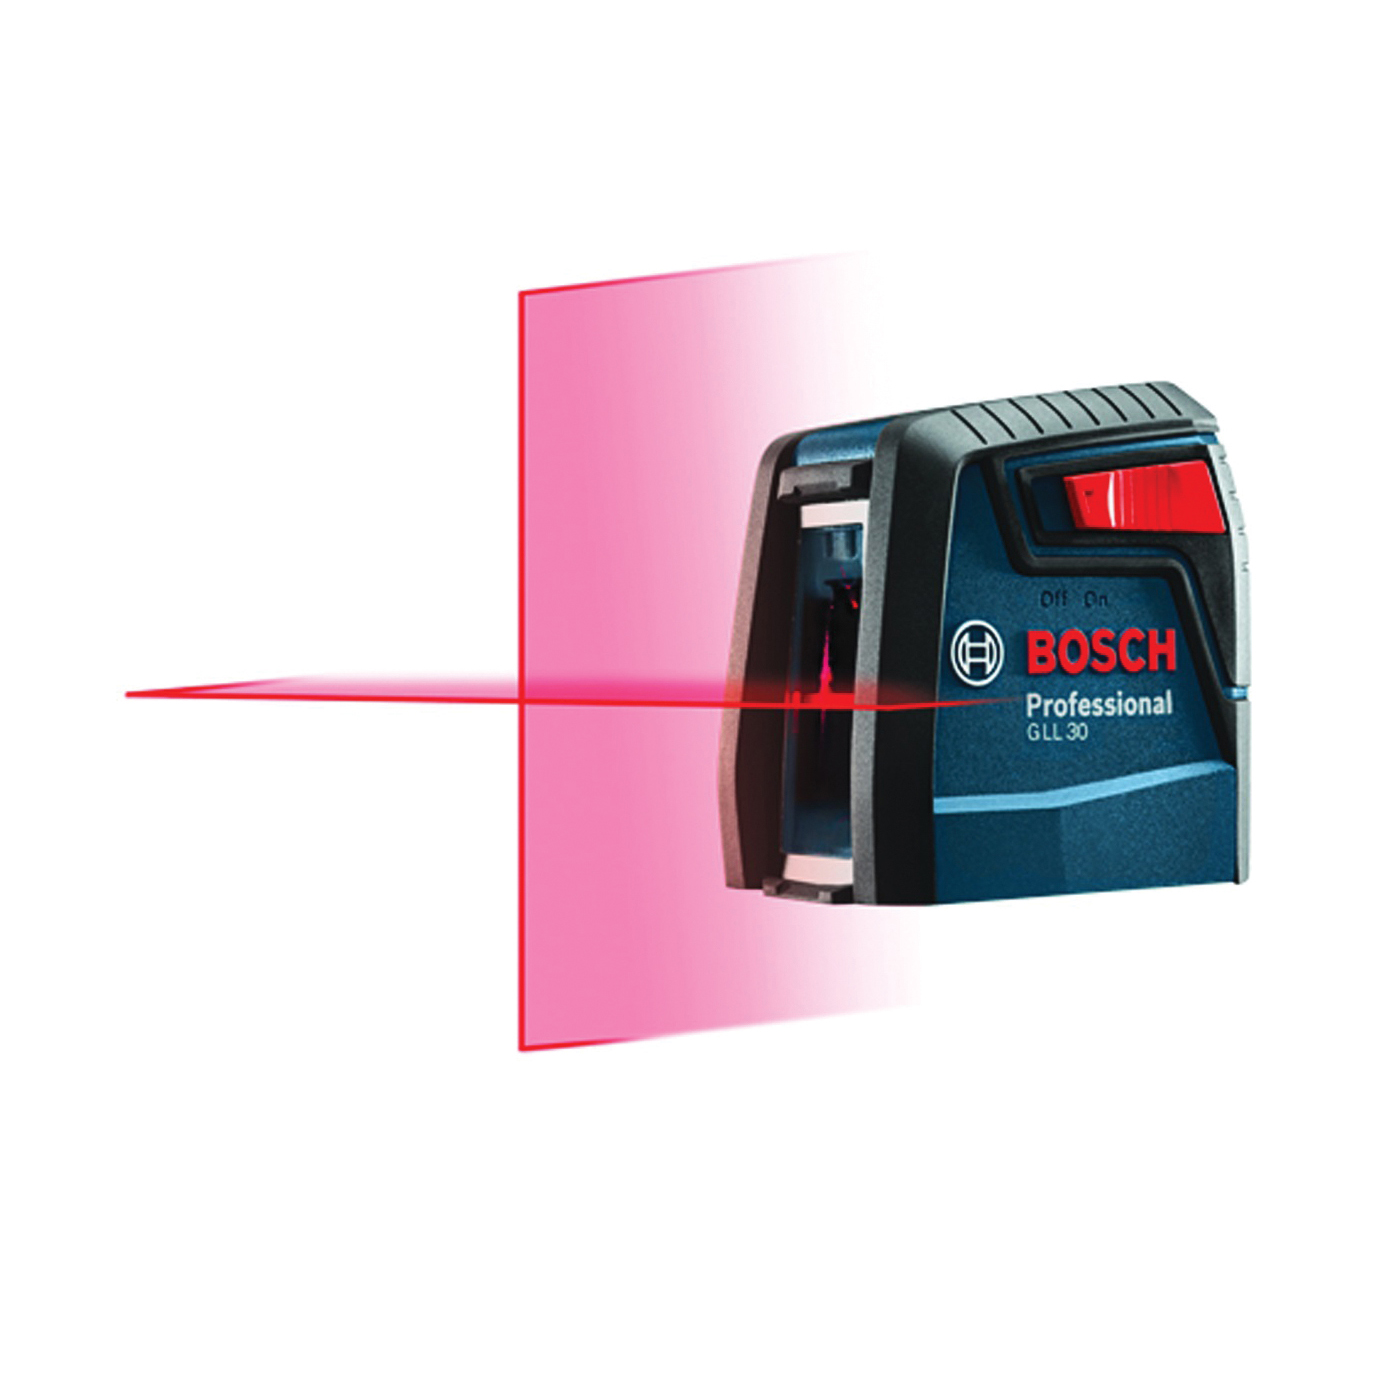 Bosch GLL 30 Cross-Line Laser, 30 ft, +/-5/16 in at 30 ft Accuracy, 2 -Line - 1